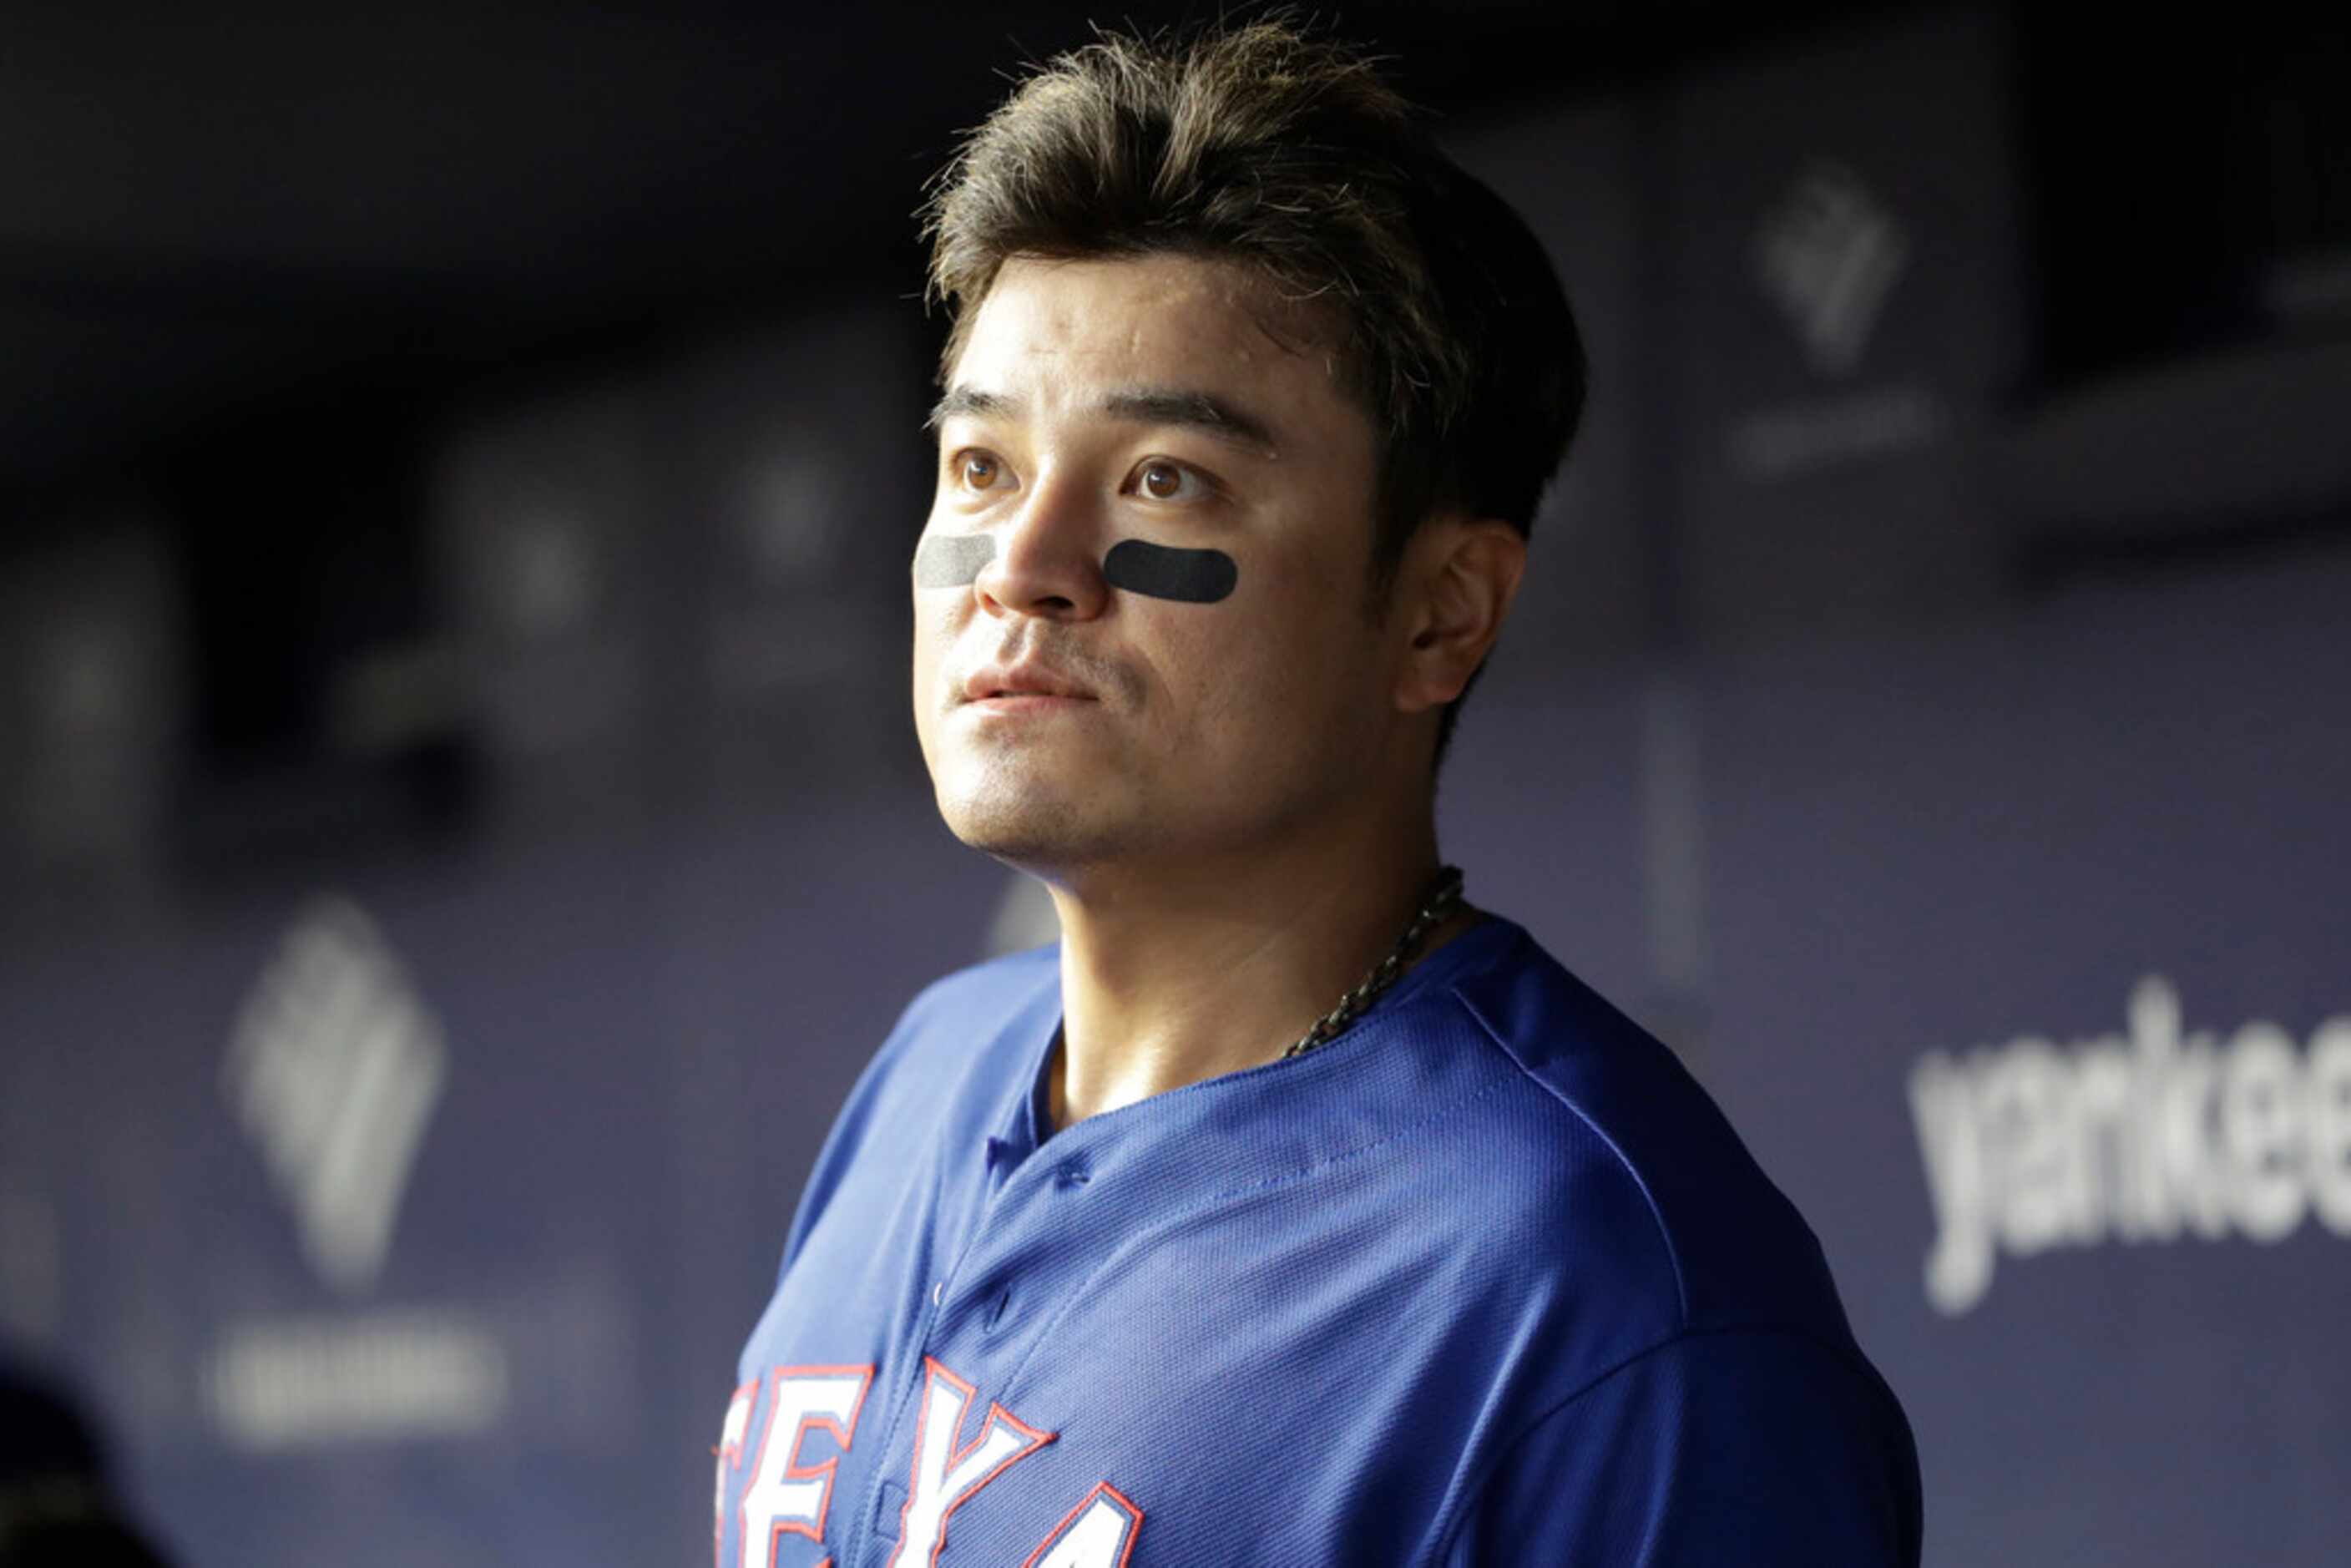 Texas Rangers' designated hitter Shin-Soo Choo peers out from the dugout during a baseball...